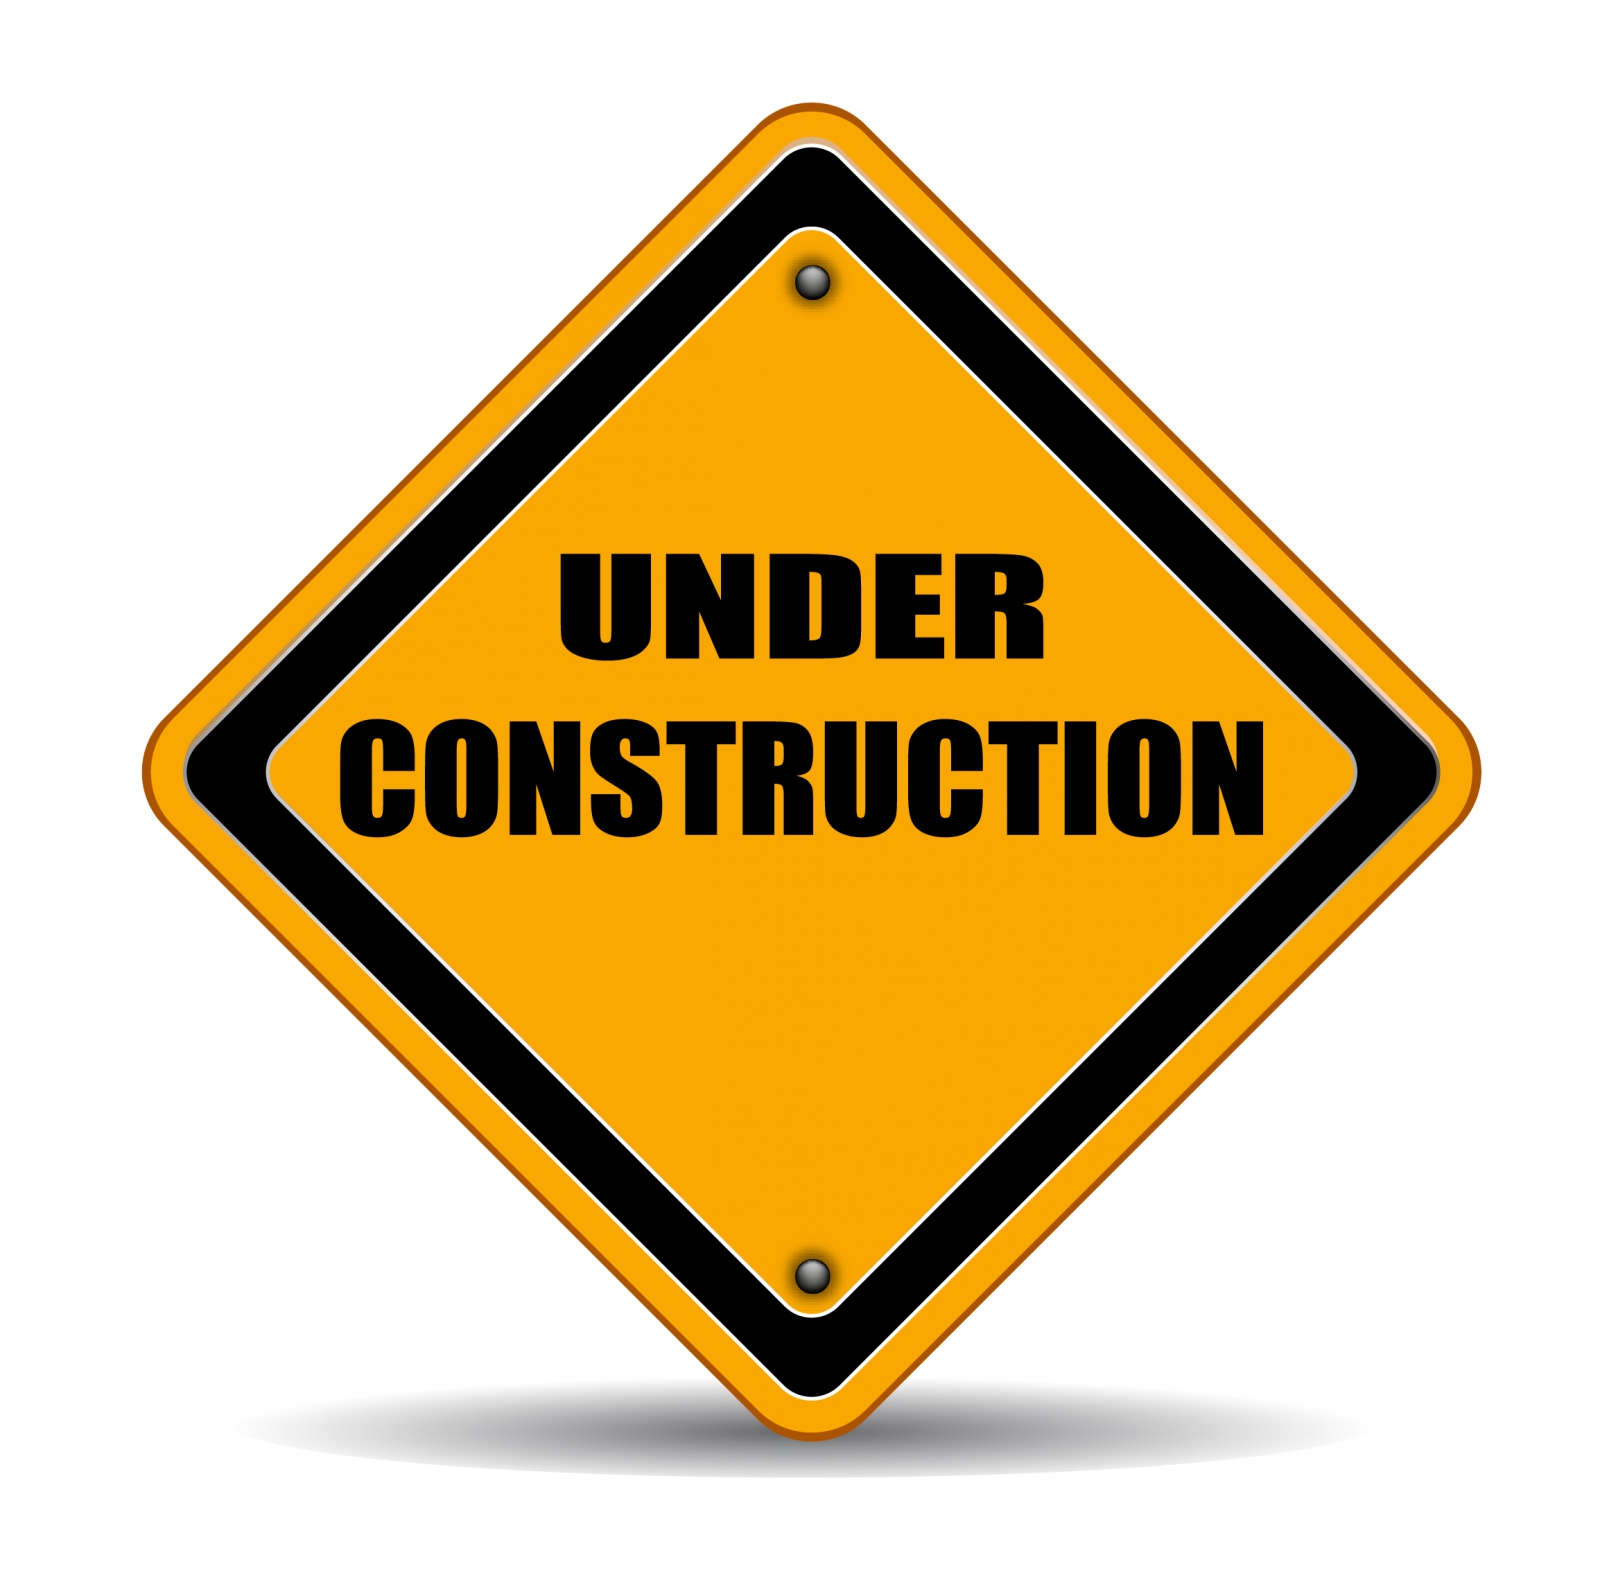 Under Construction Sign Vector Free